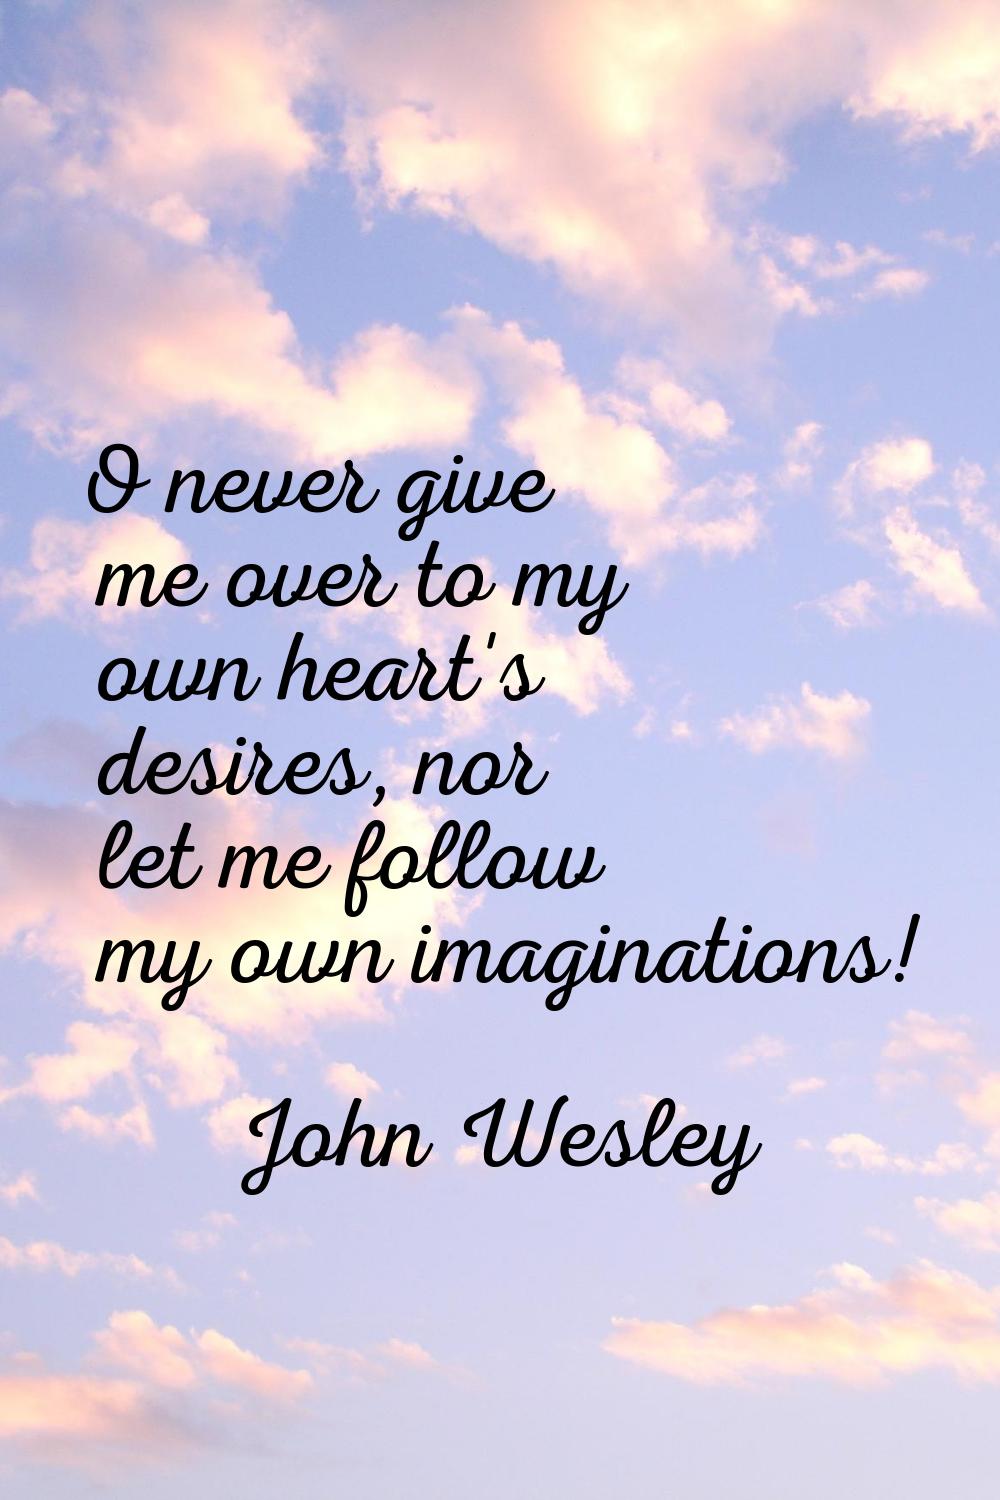 O never give me over to my own heart's desires, nor let me follow my own imaginations!